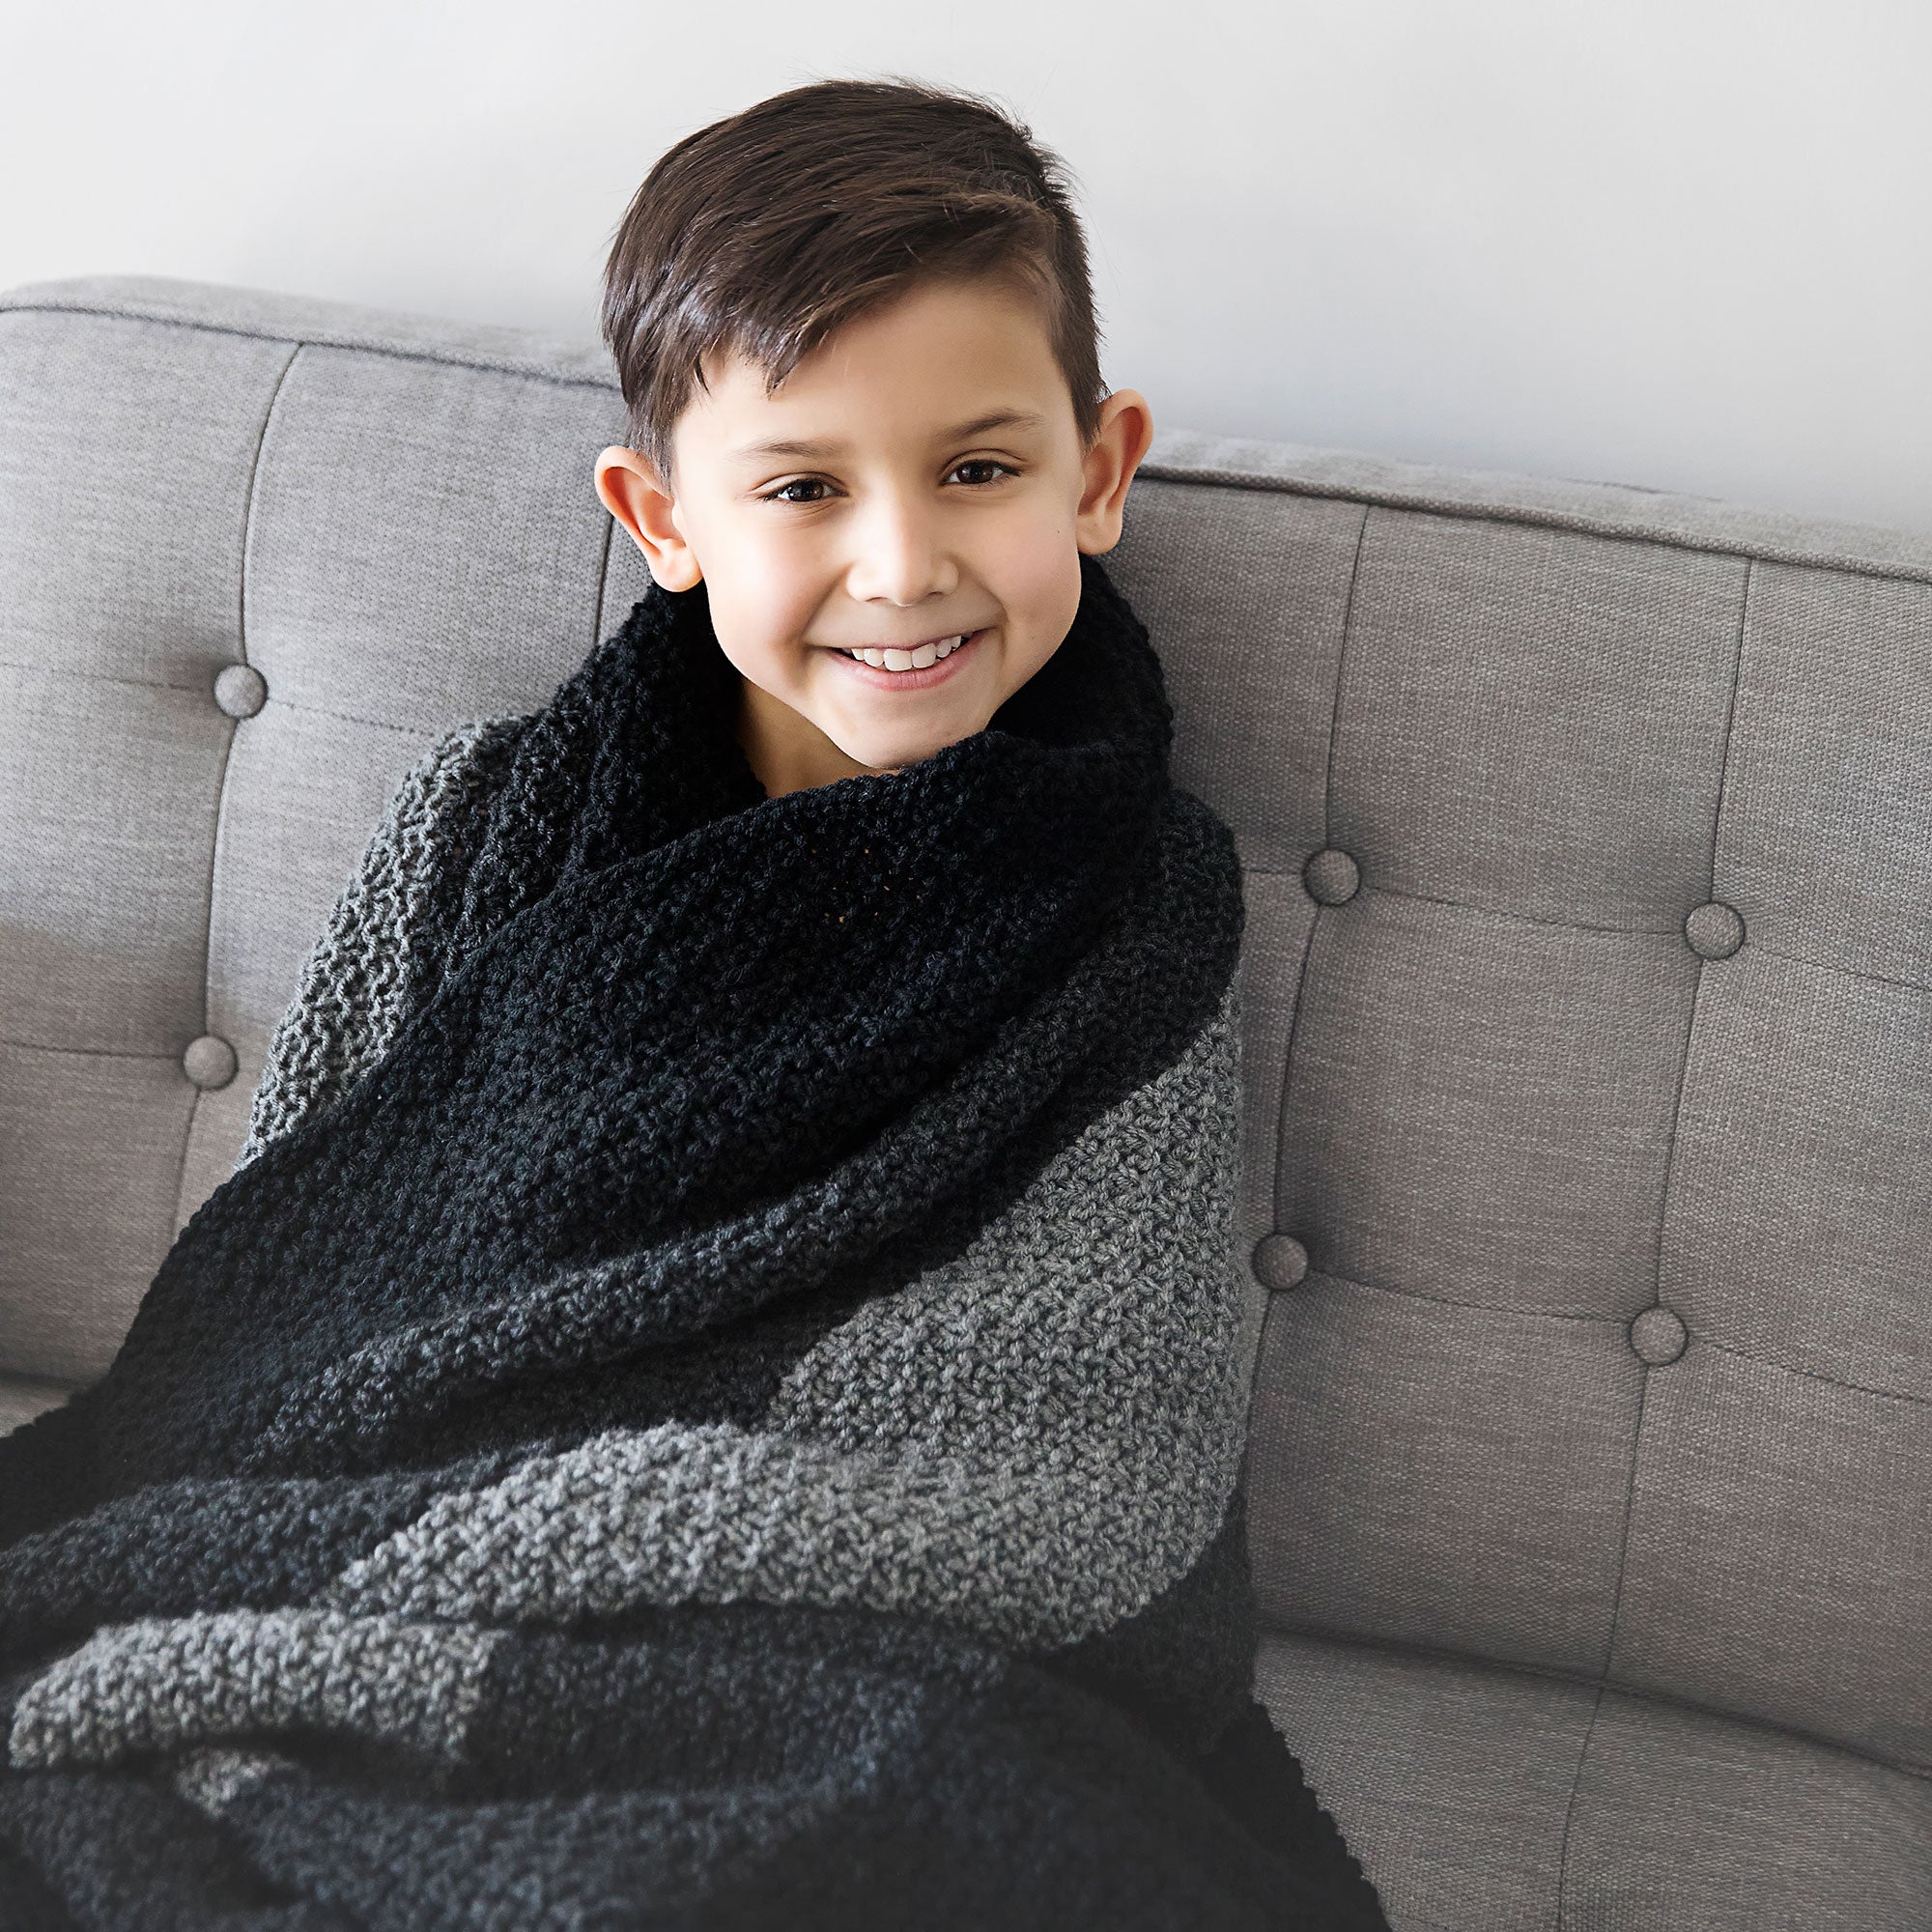 The Faded Throw Knitting Pattern